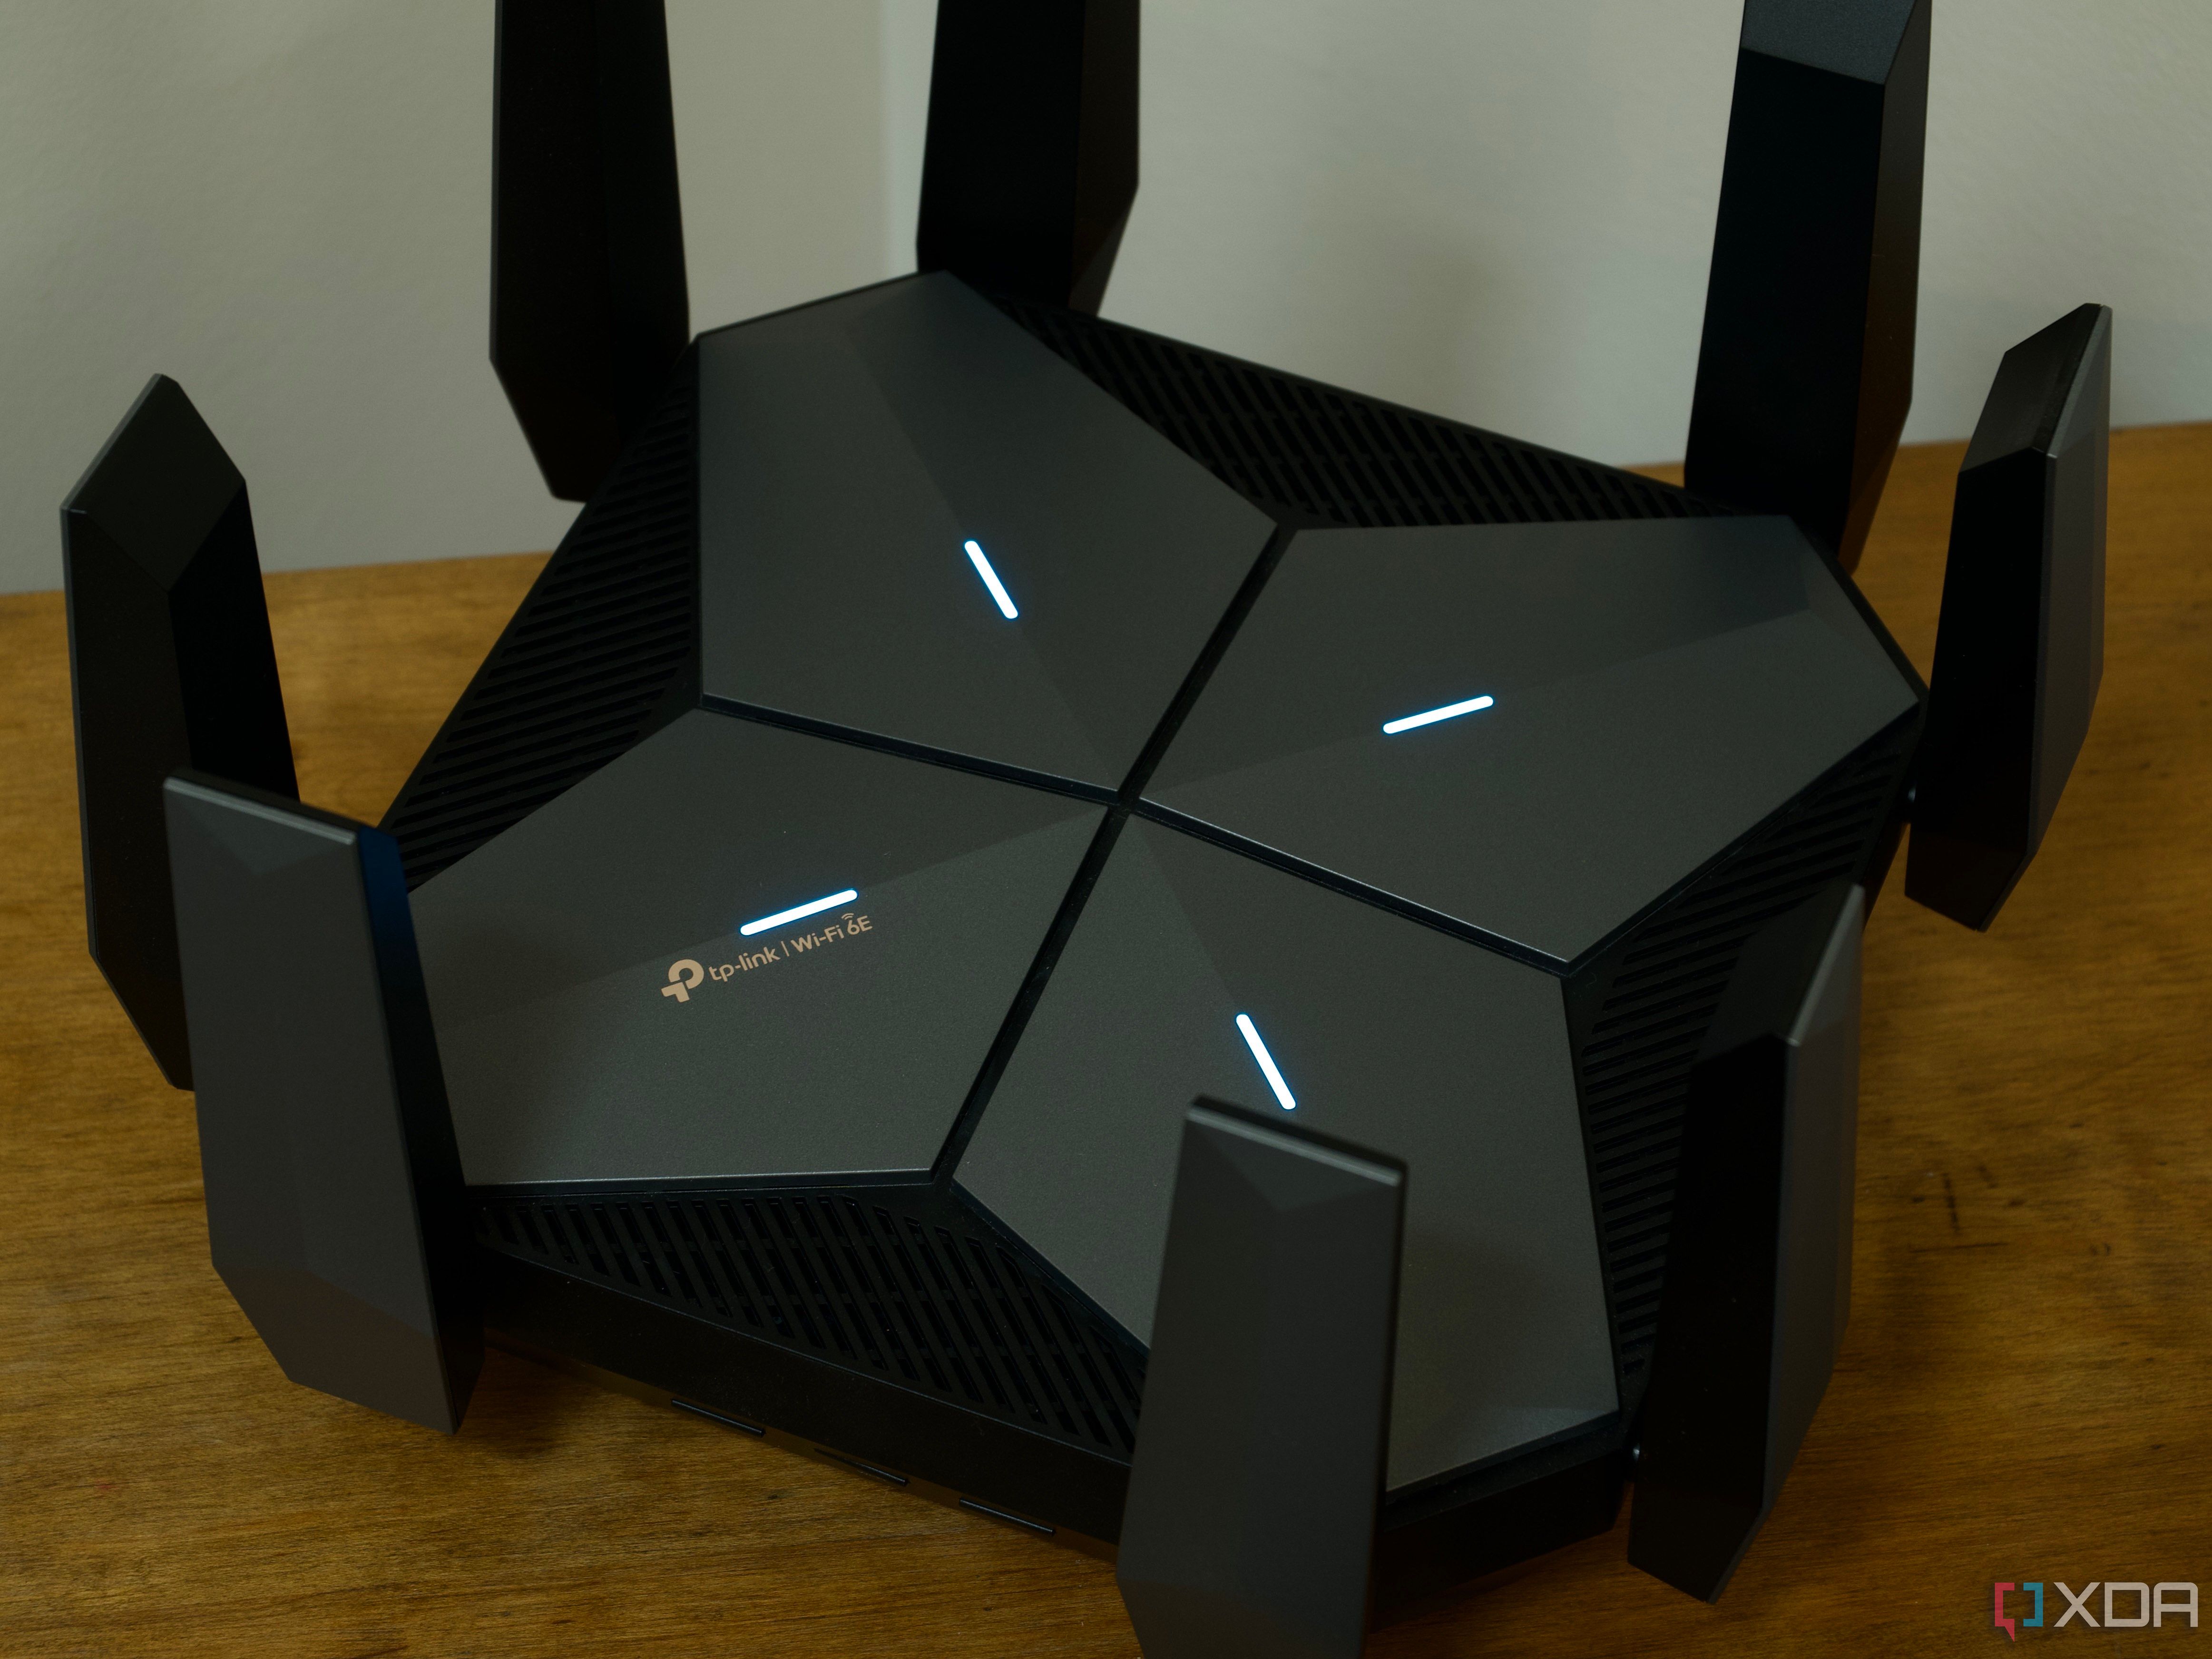 TP-Link Unveils Deco X55 Pro Wi-Fi 6 mesh system With 2.5Gbps Ethernet